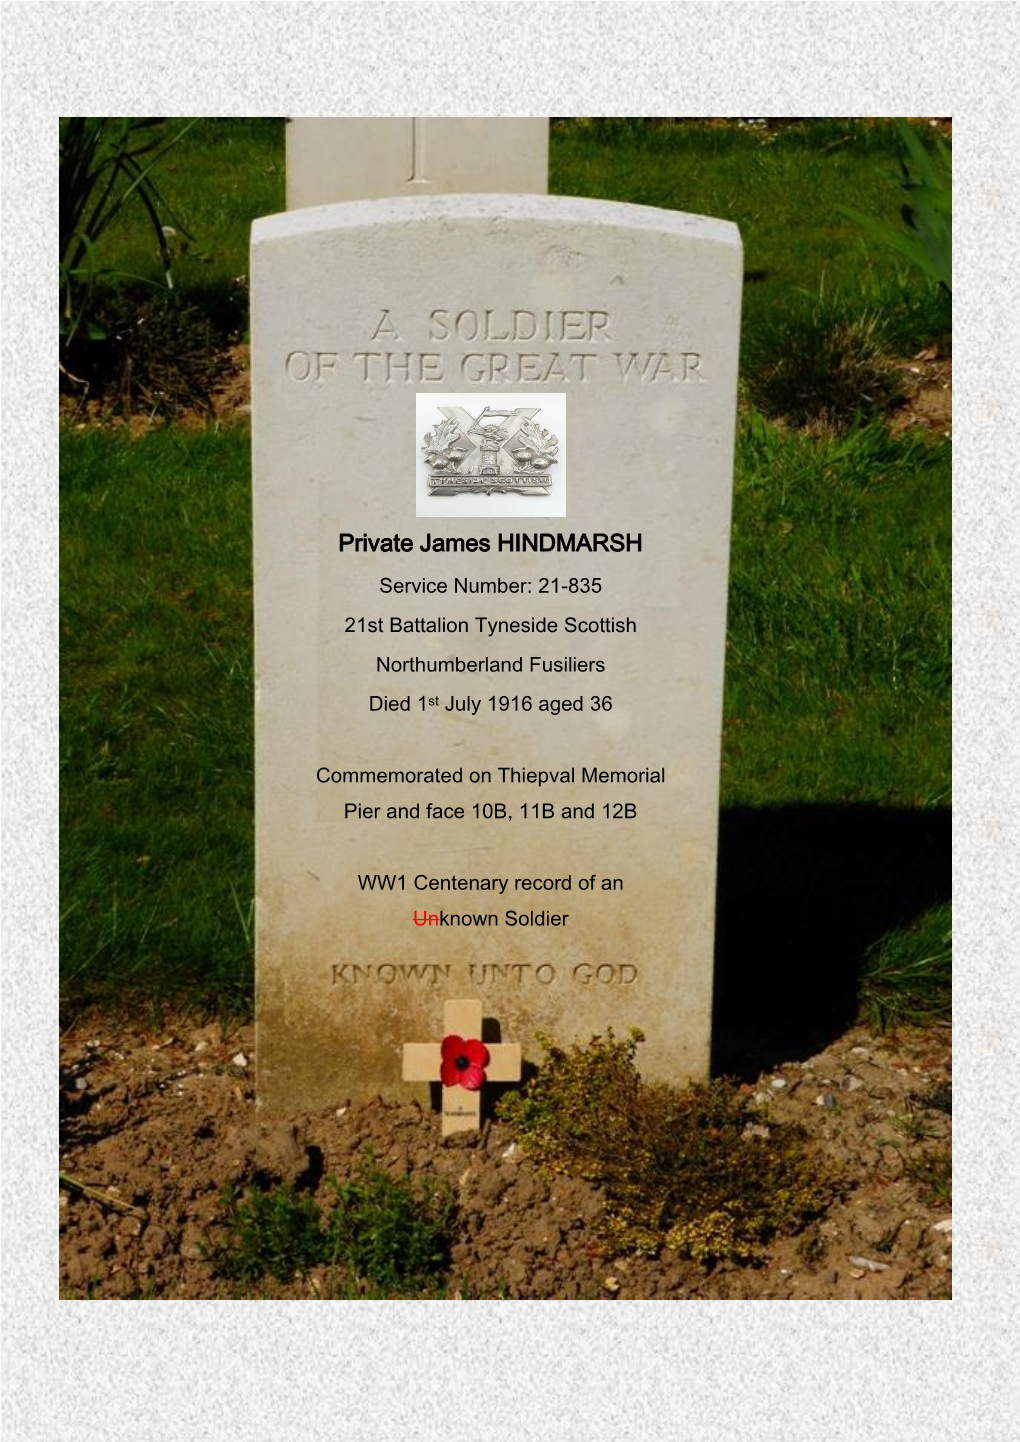 Private James HINDMARSH Service Number: 21-835 21St Battalion Tyneside Scottish Northumberland Fusiliers Died 1St July 1916 Aged 36